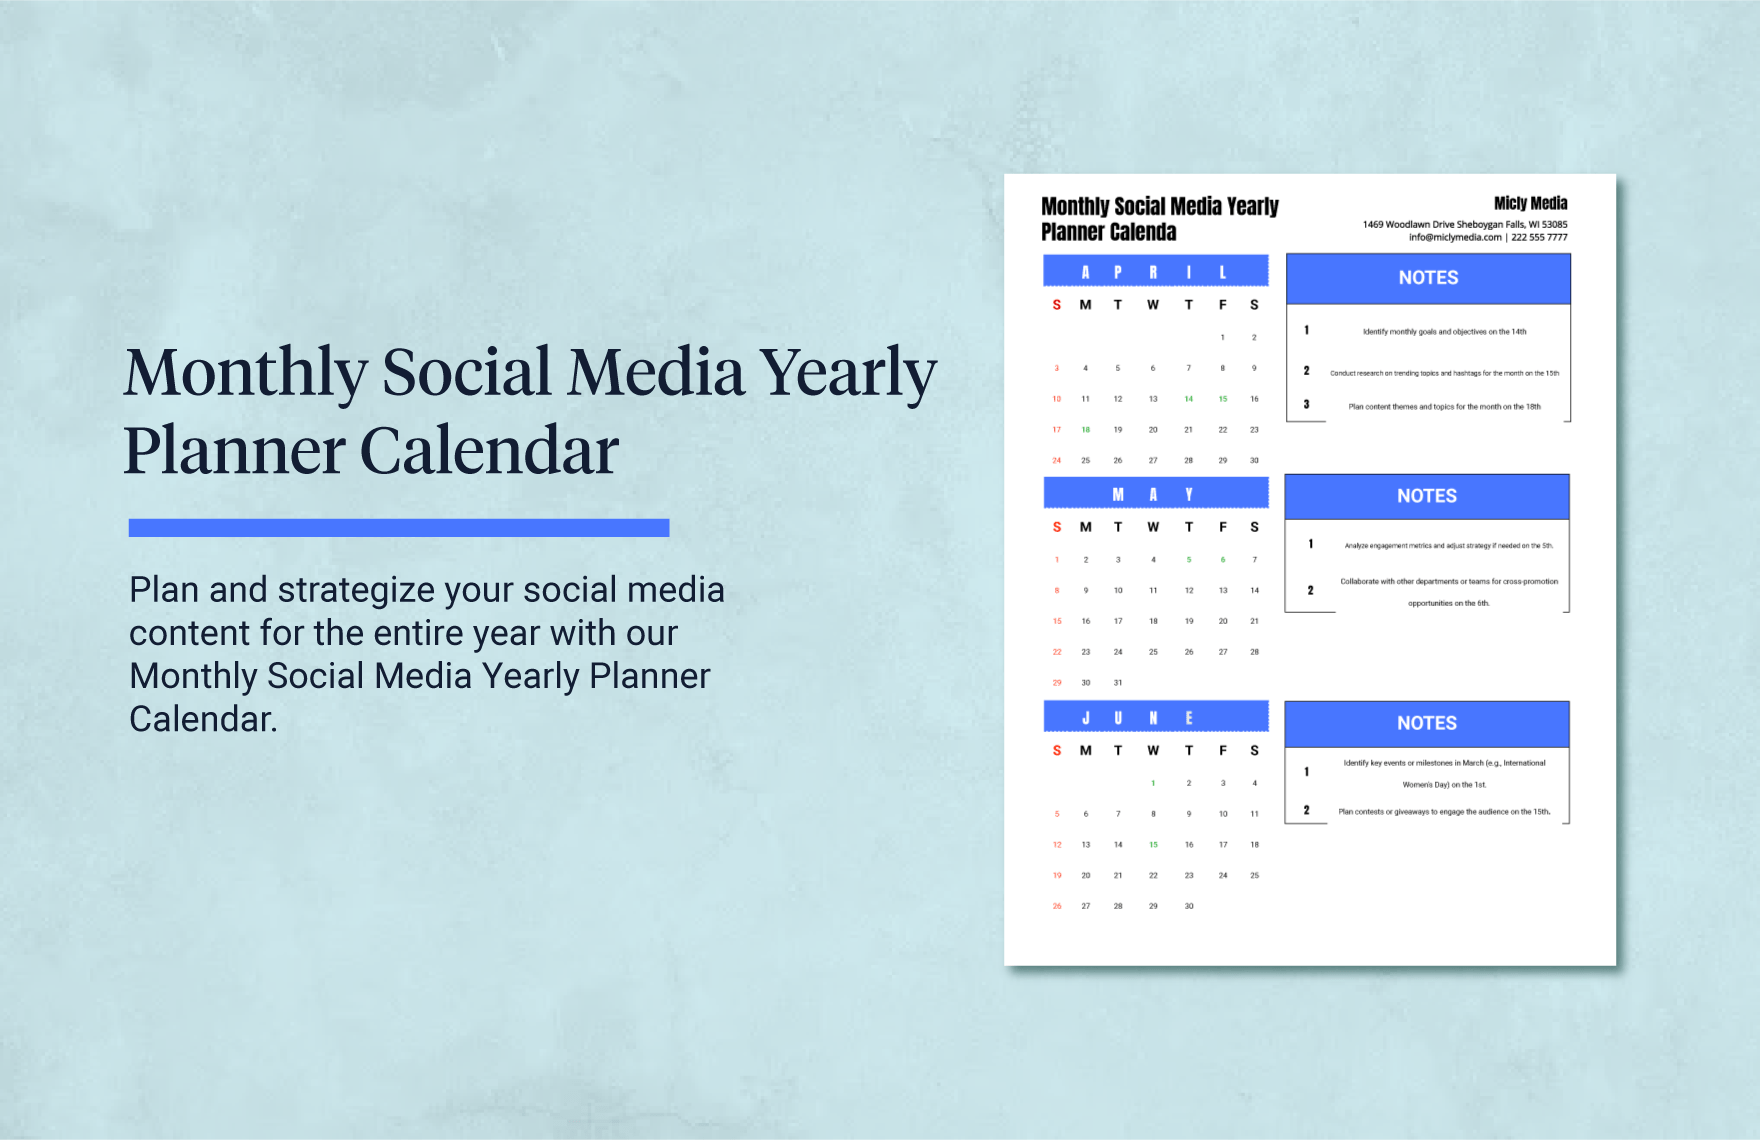 Monthly Social Media Yearly Planner Calendar